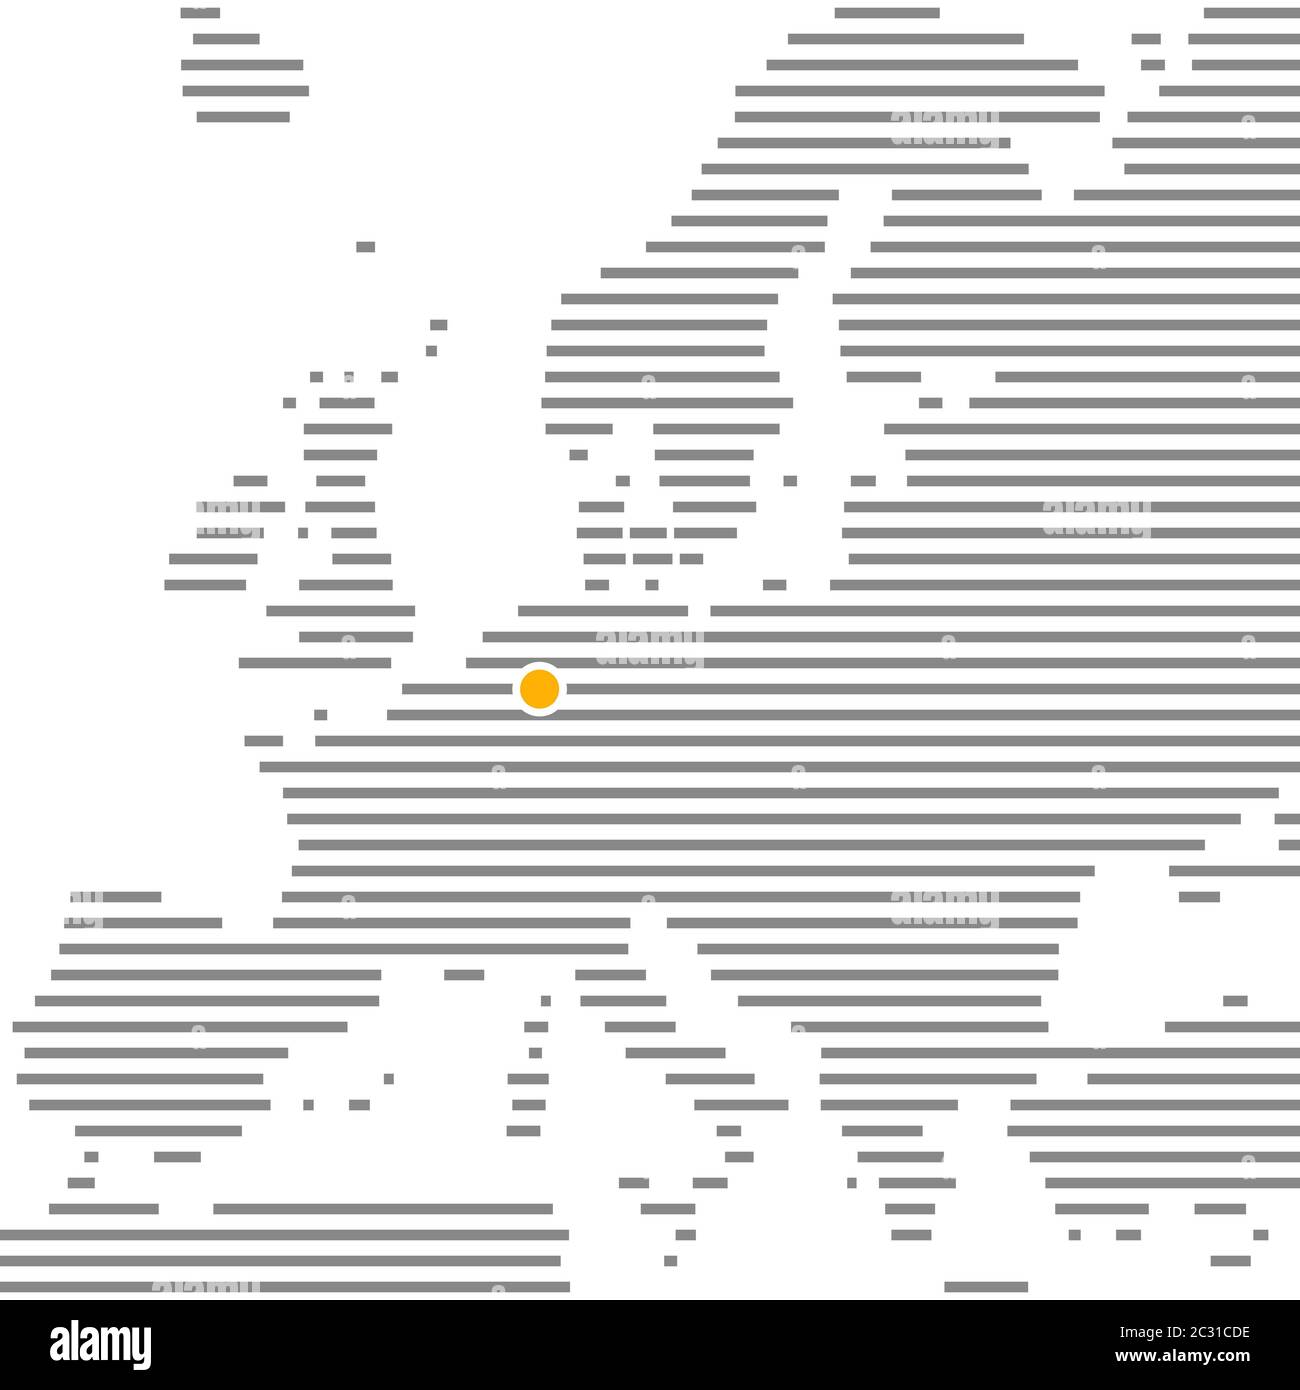 City Cologne or Duesseldorf in Germany on grey striped map of Europe with orange dot Stock Photo